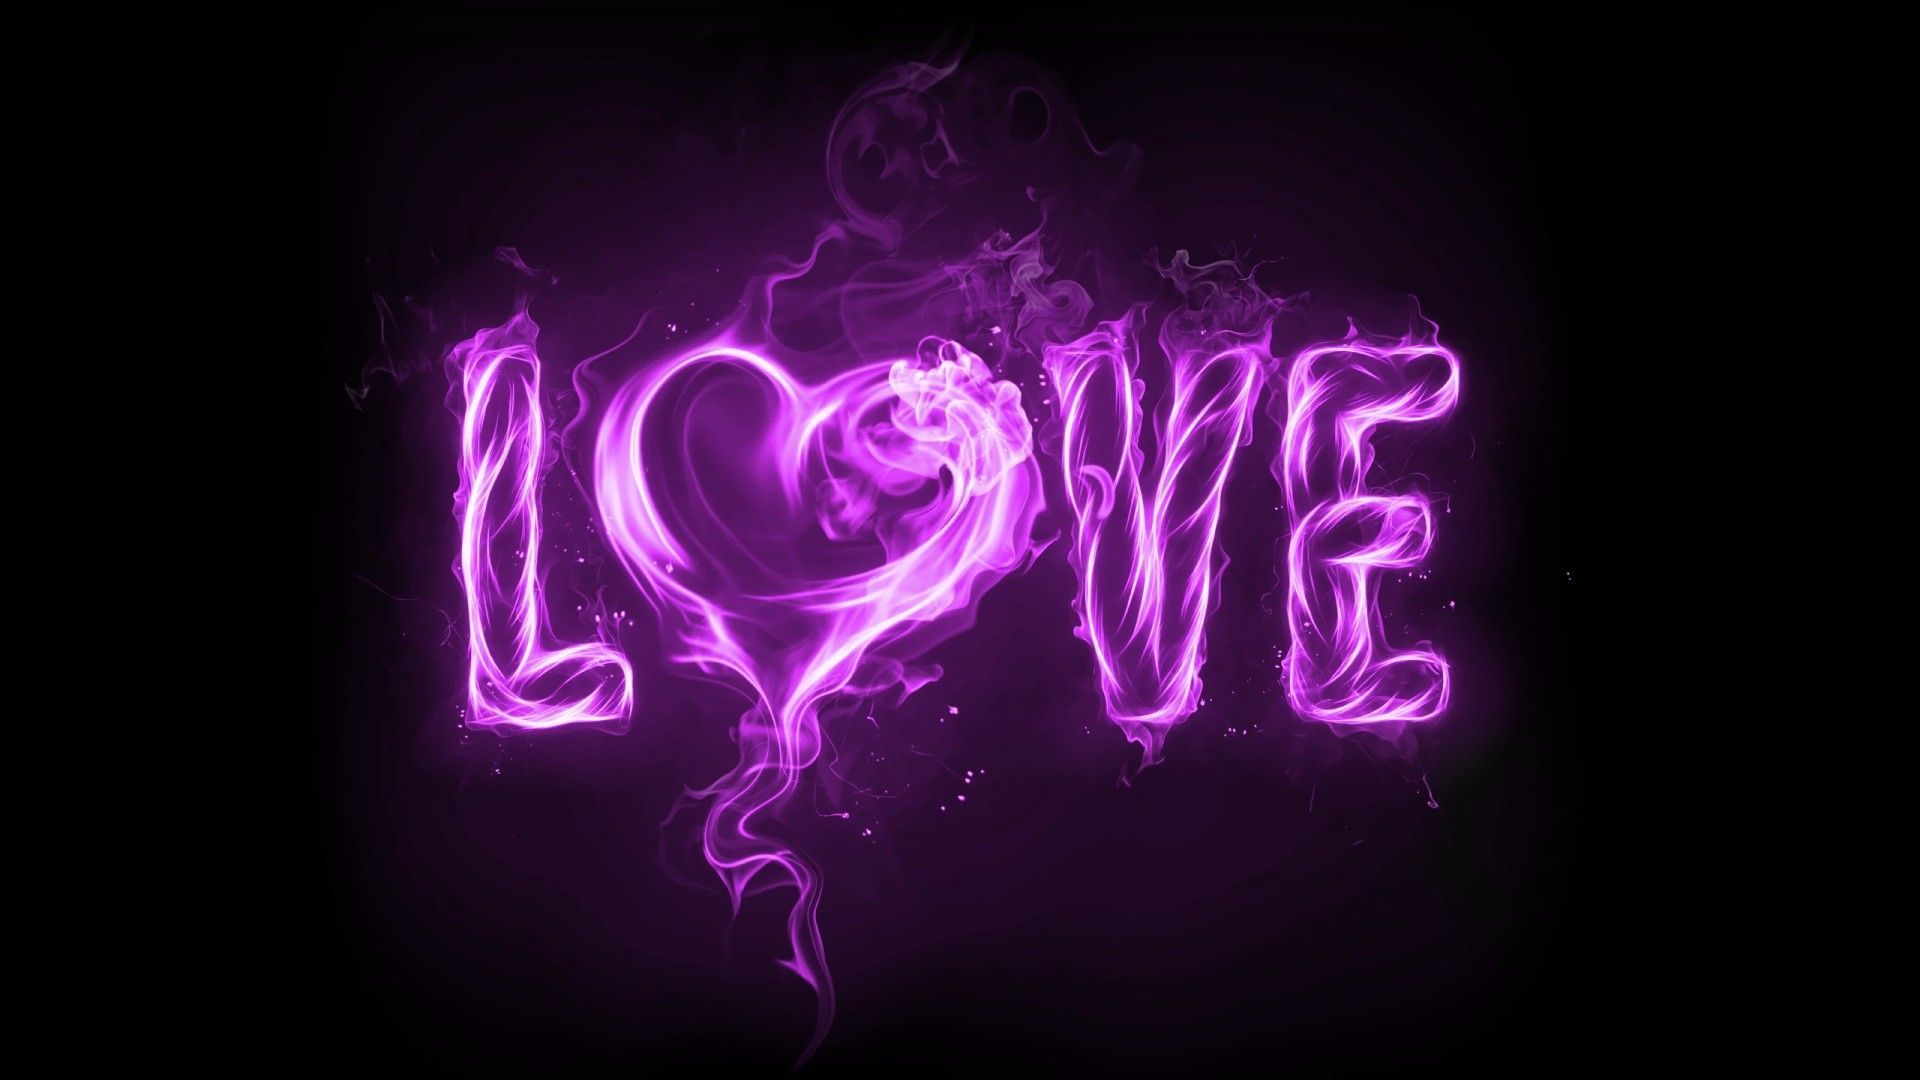 Purple Love wallpaper with high resolution 1920x1080 pixel. You can use this wallpaper for your Windows and Mac OS computers as well as your Android and iPhone smartphones - Neon purple, cute purple